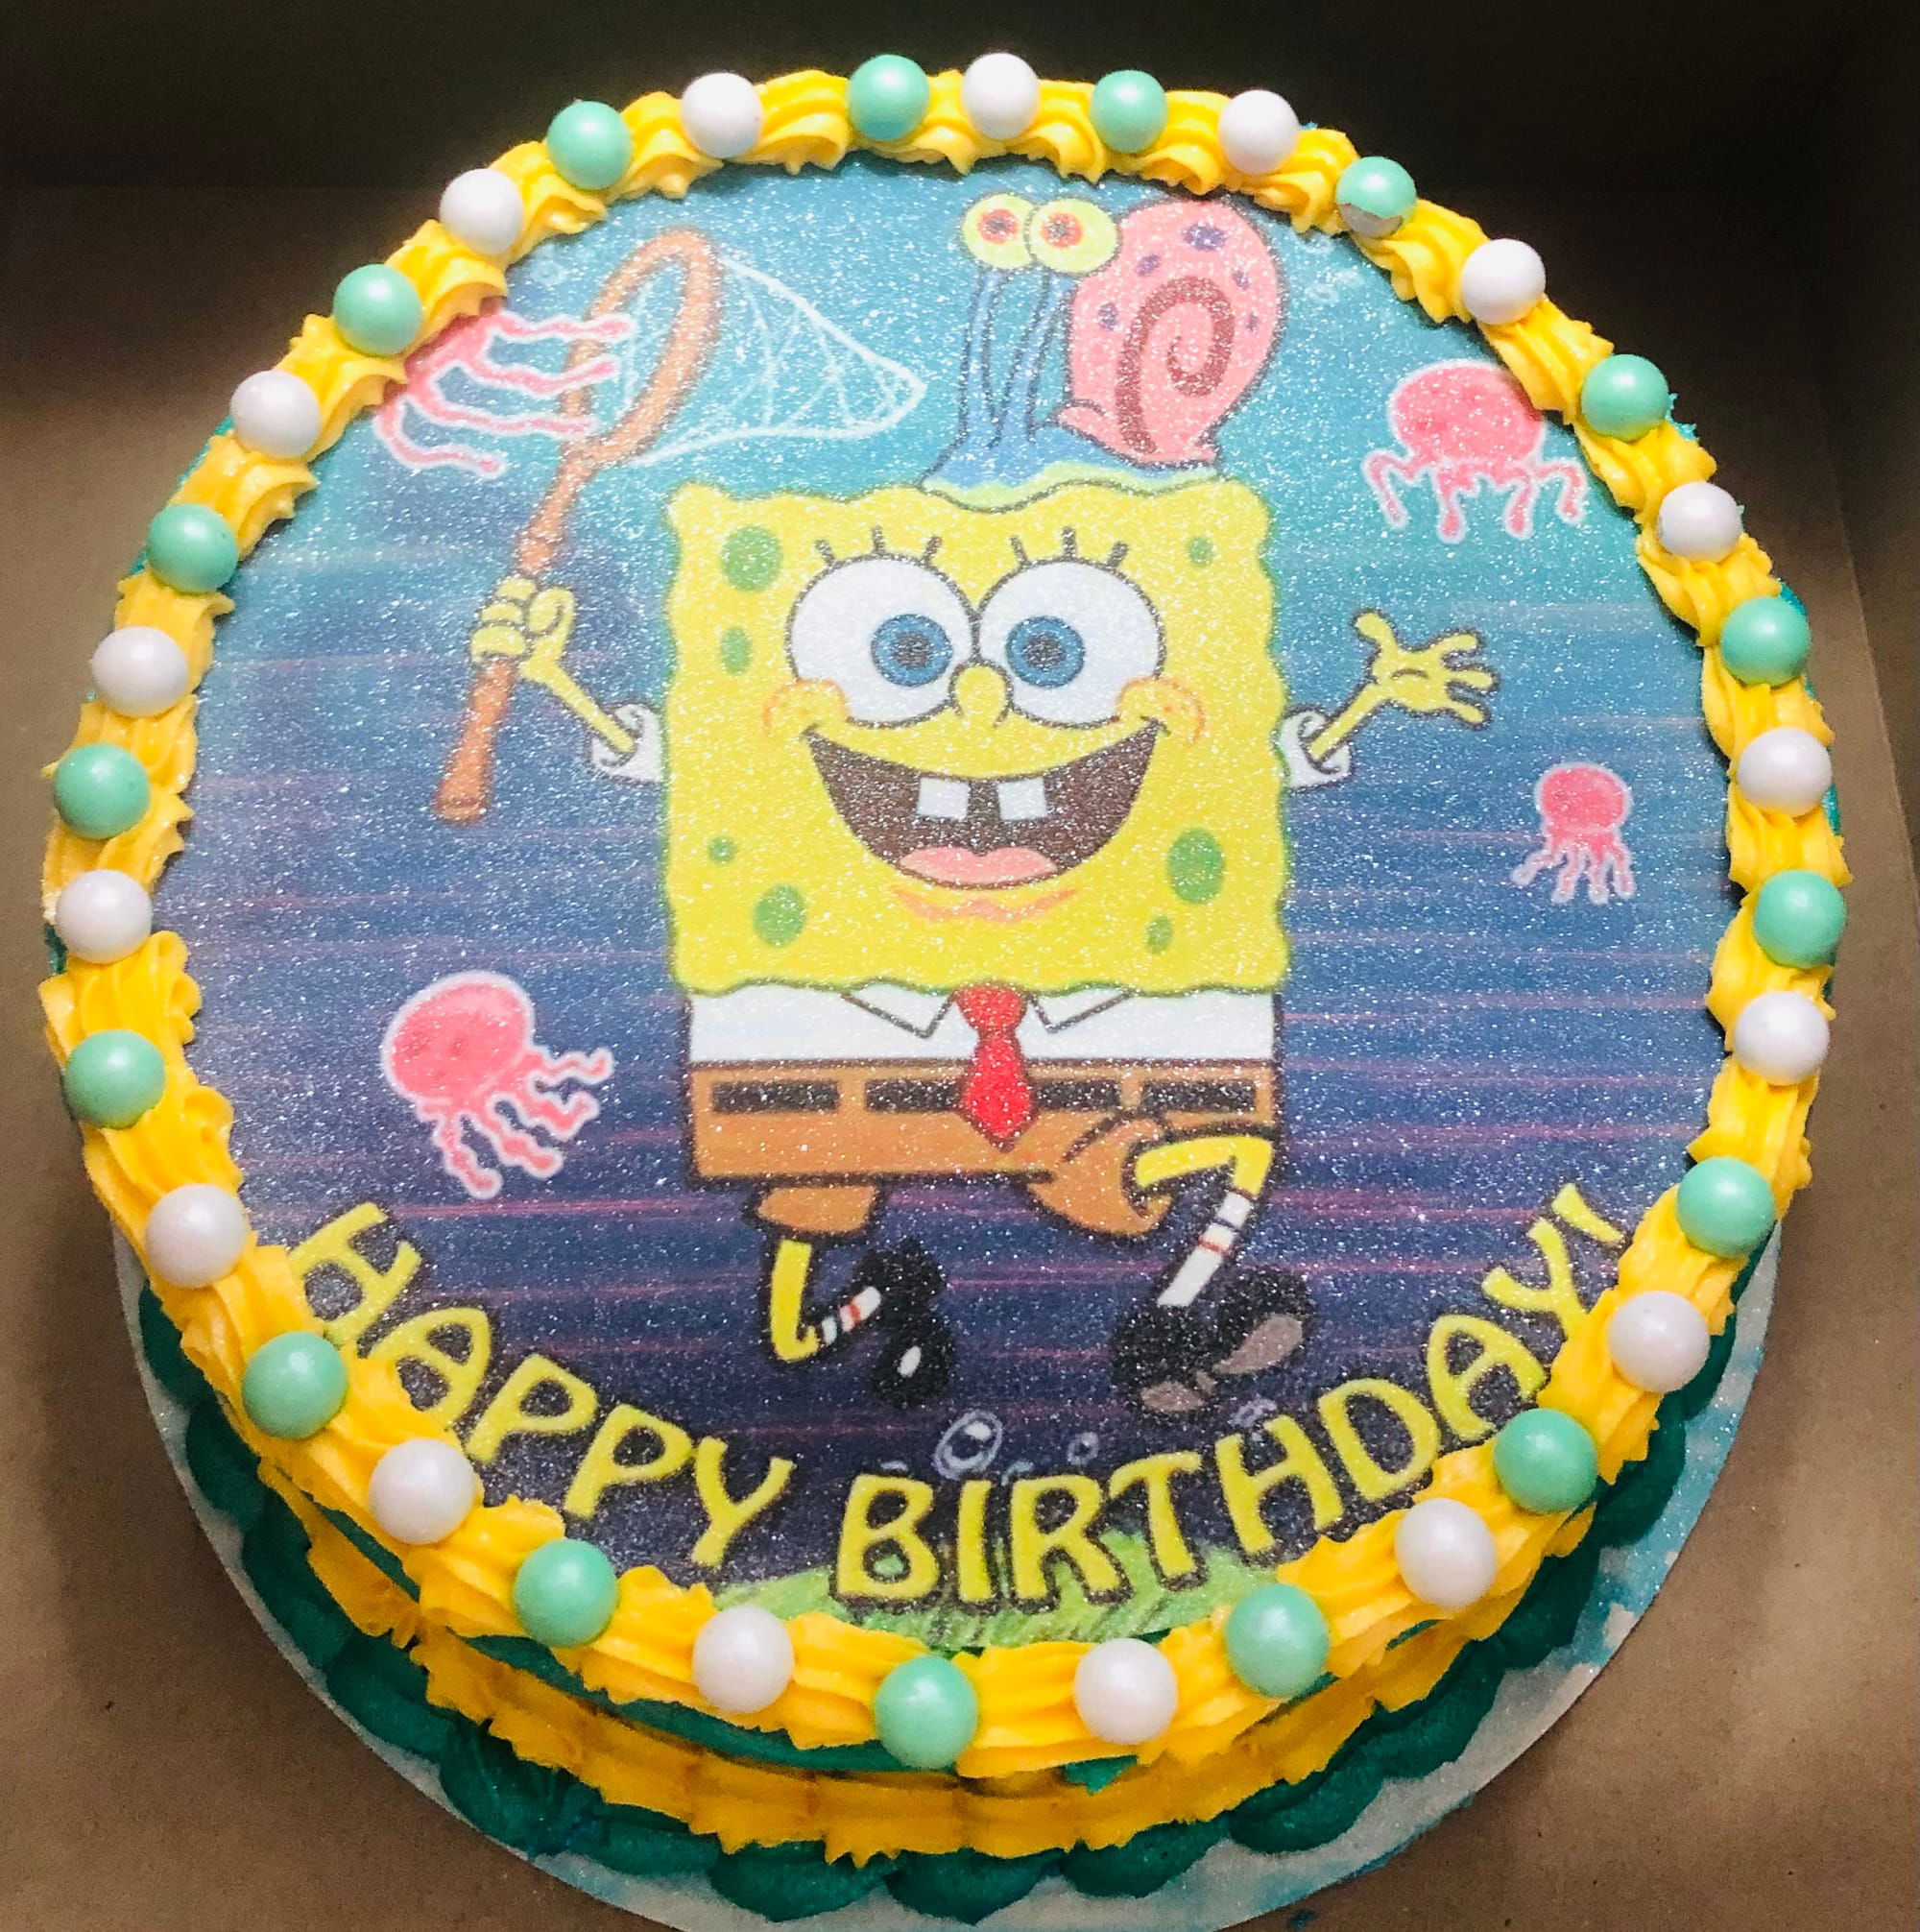 2 Layer Strawberry SpongeBob SquarePants Cake With Buttercream Frosting and Edible Image